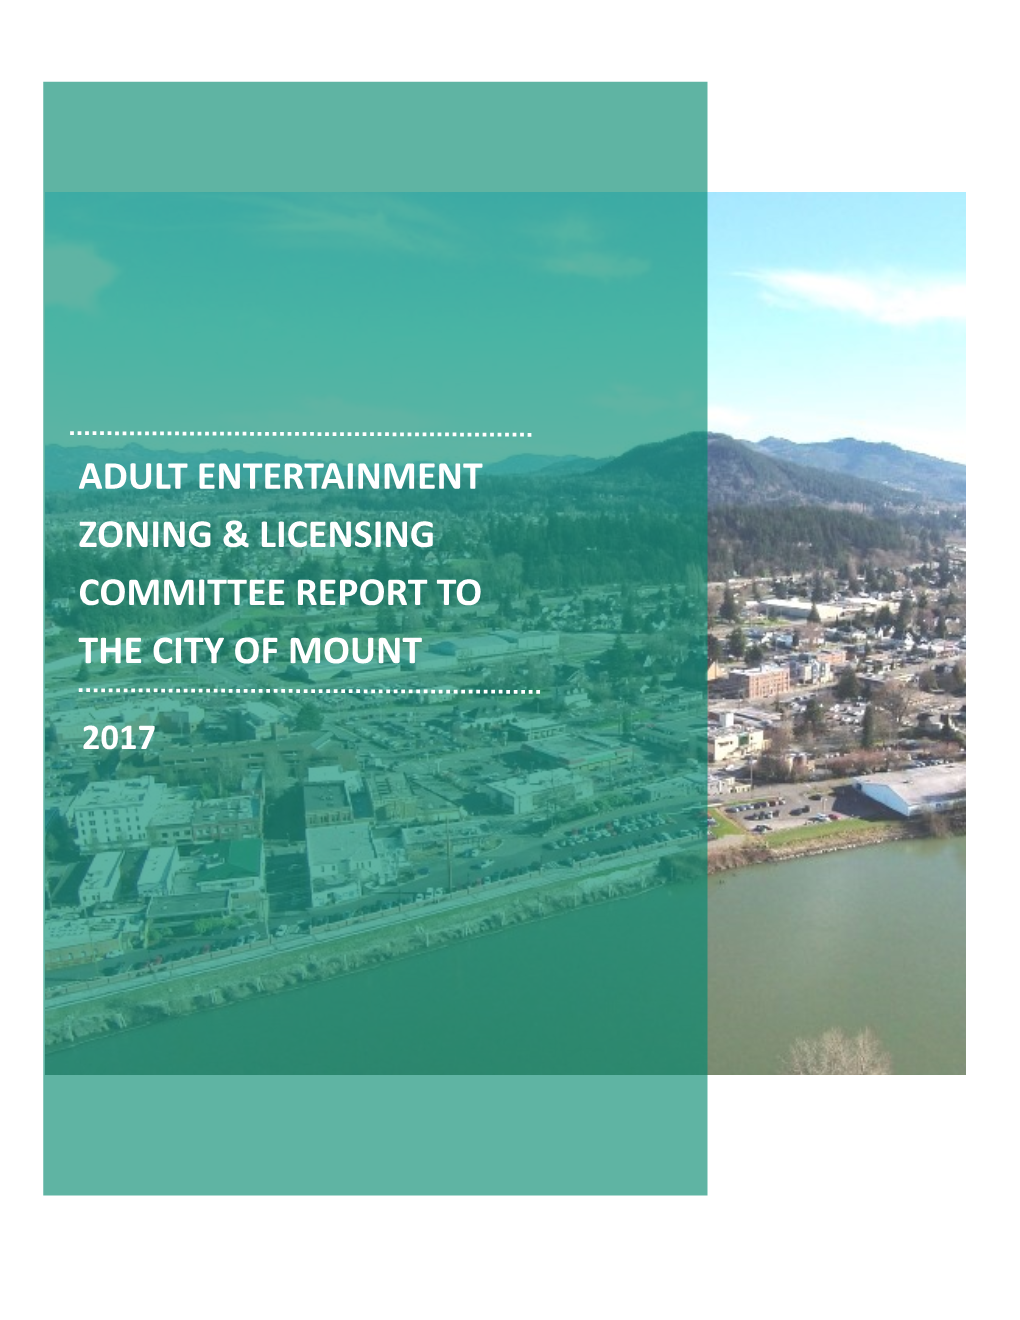 Adult Entertainment Zoning and Licensing Committee